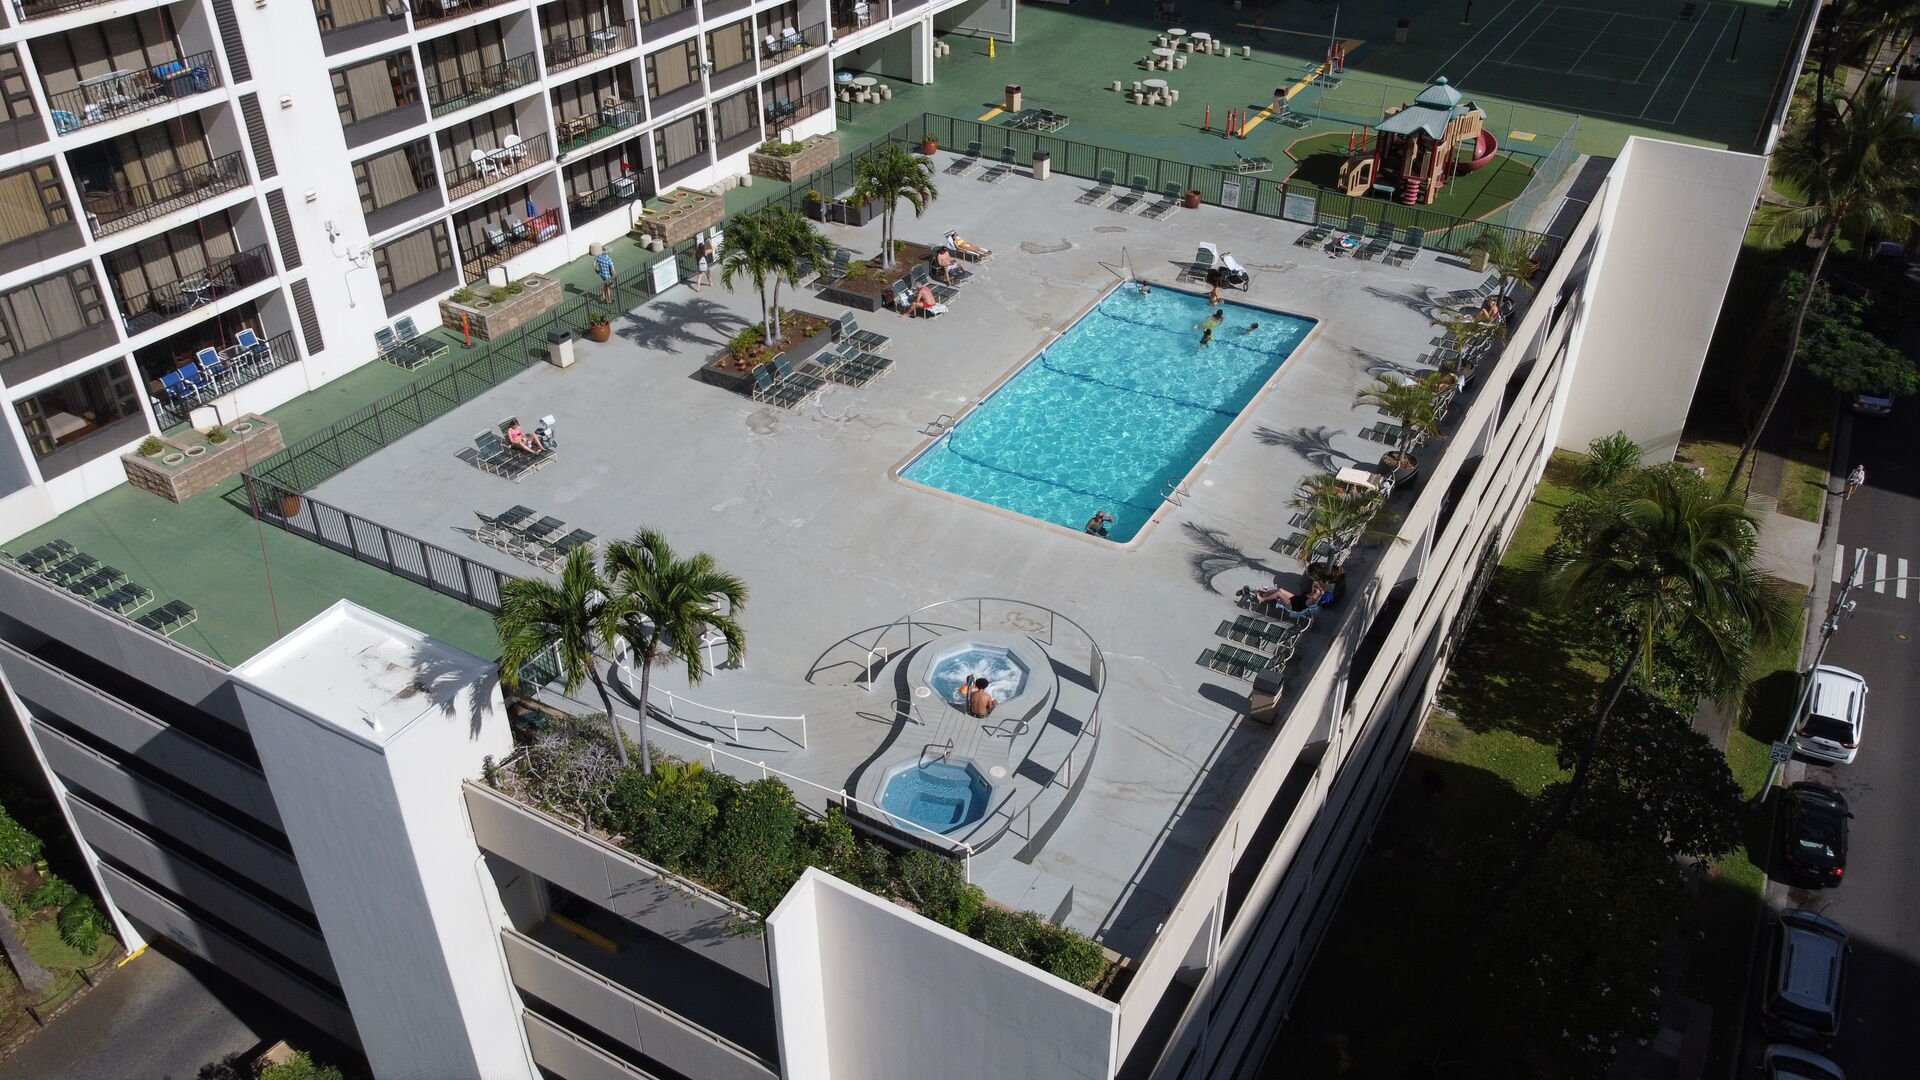 Here's the recreation deck on the 6th floor!